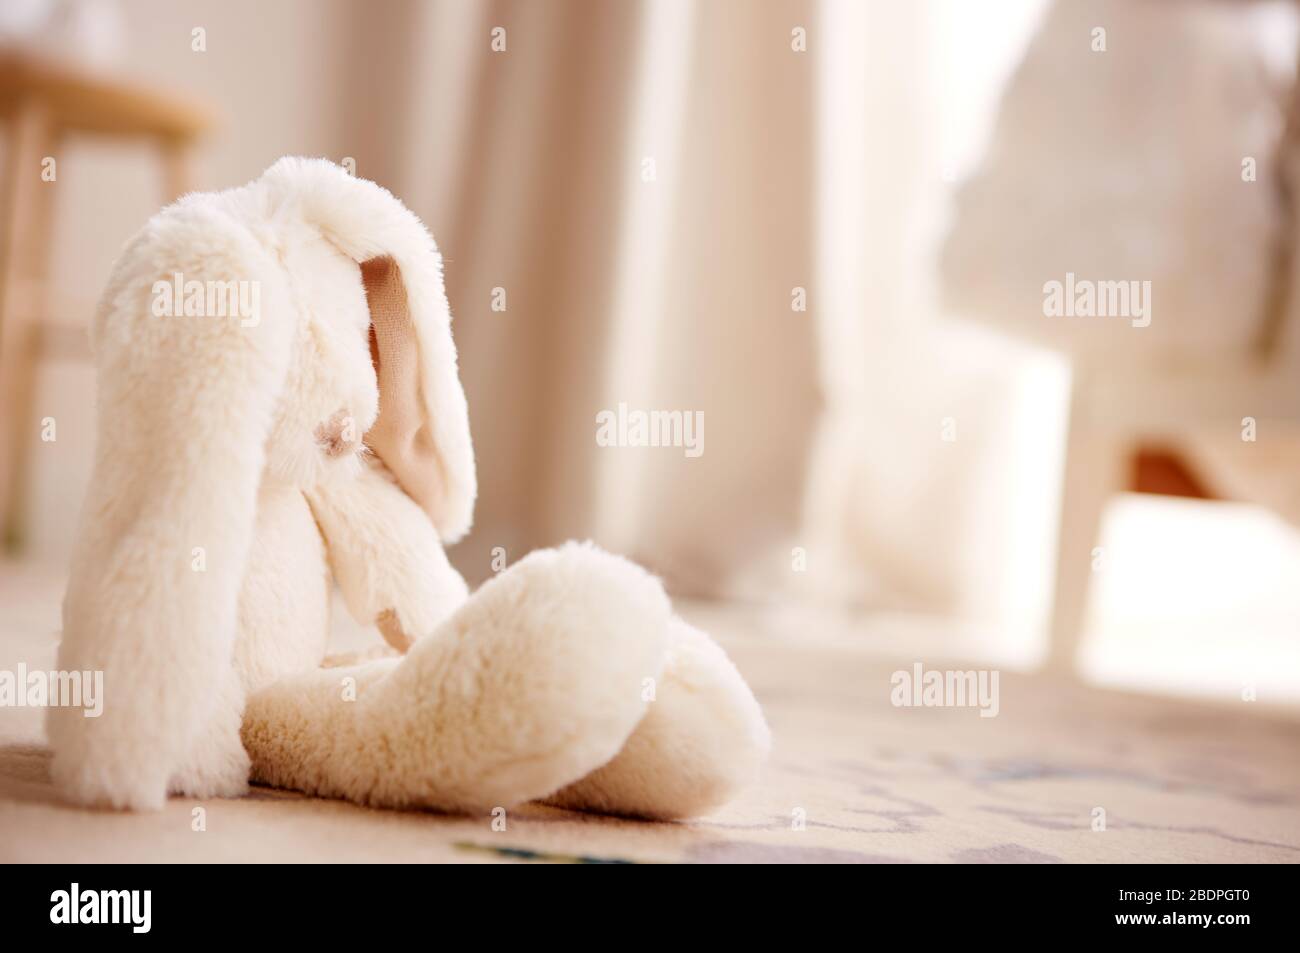 Image of a stuffed soft toy bunny on the floor Stock Photo